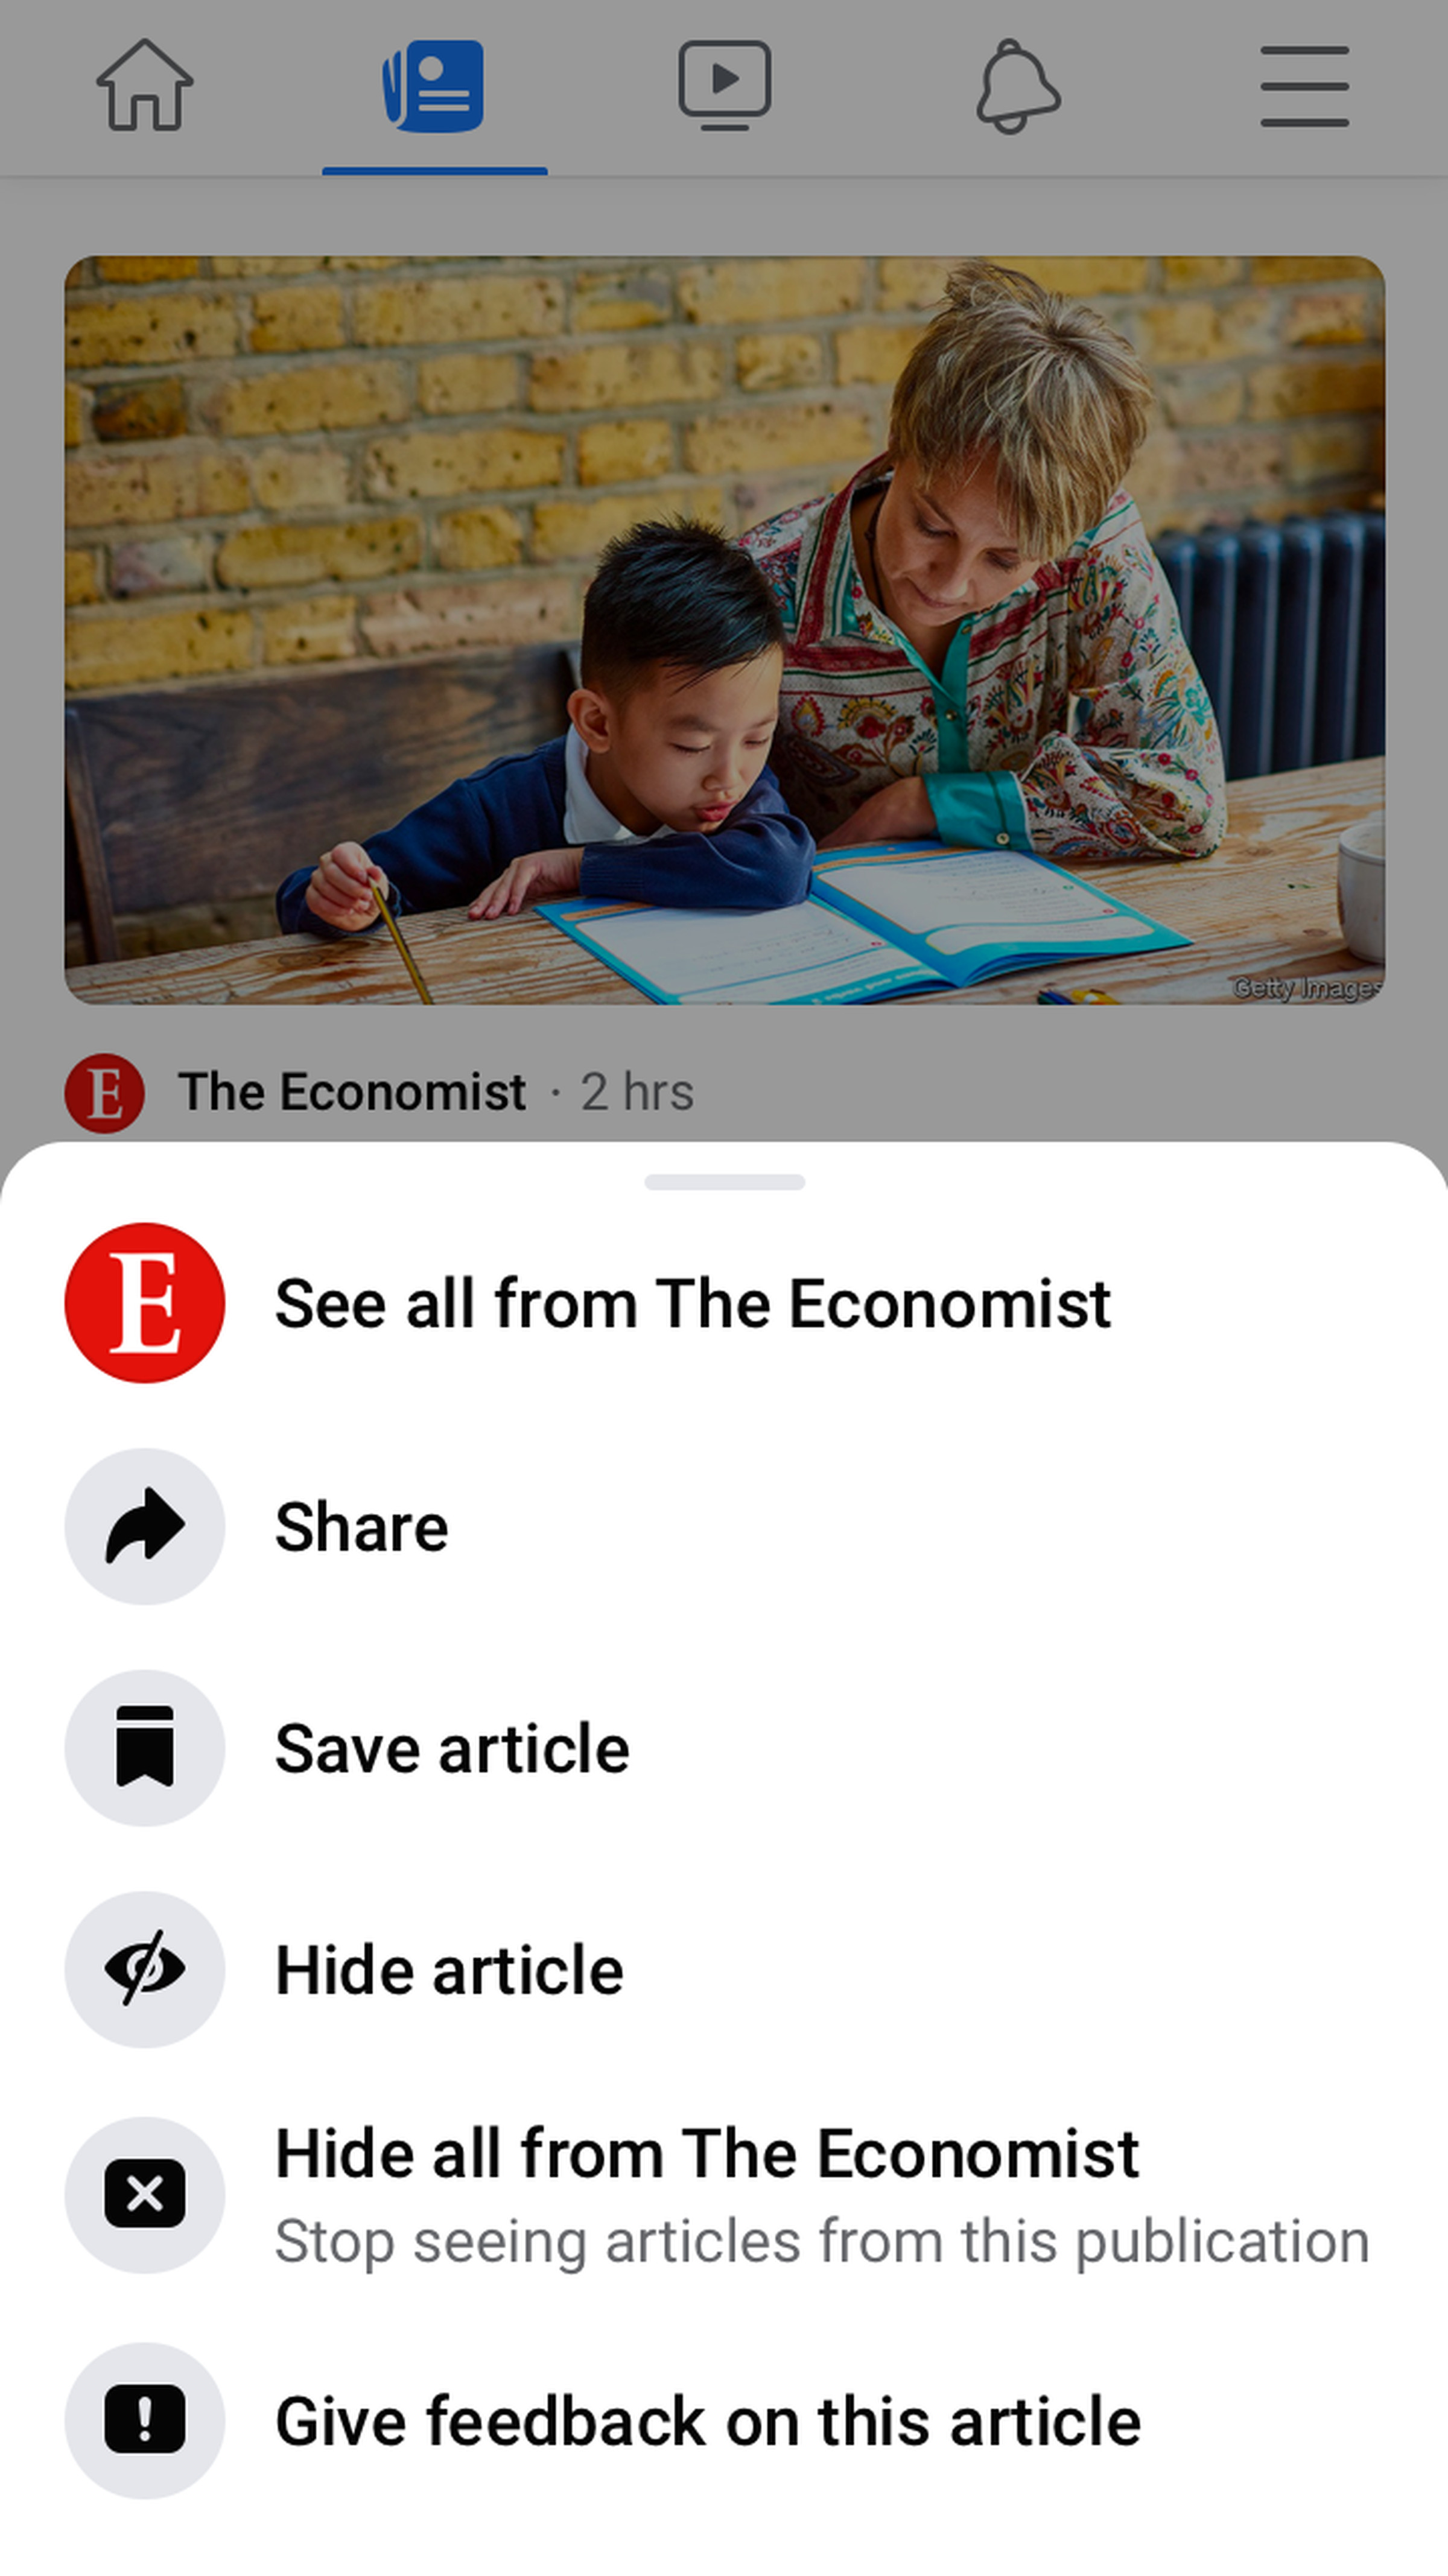 There are also controls to allow you to hide articles or publications from your feed.